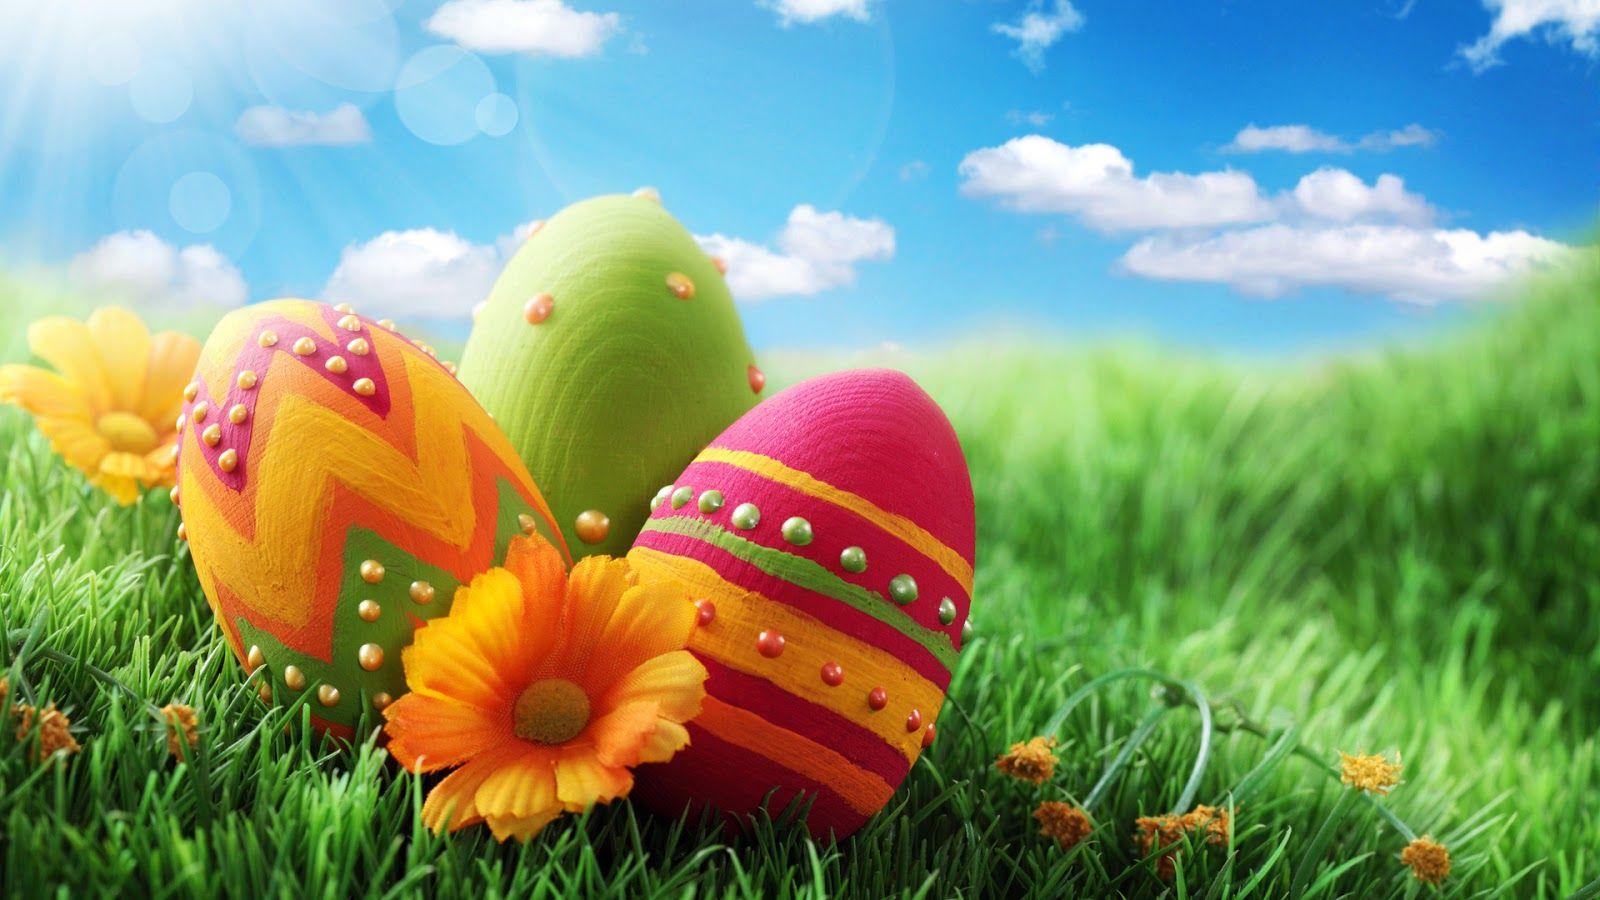 Happy Easter Picture, Image and Wallpaper 2017